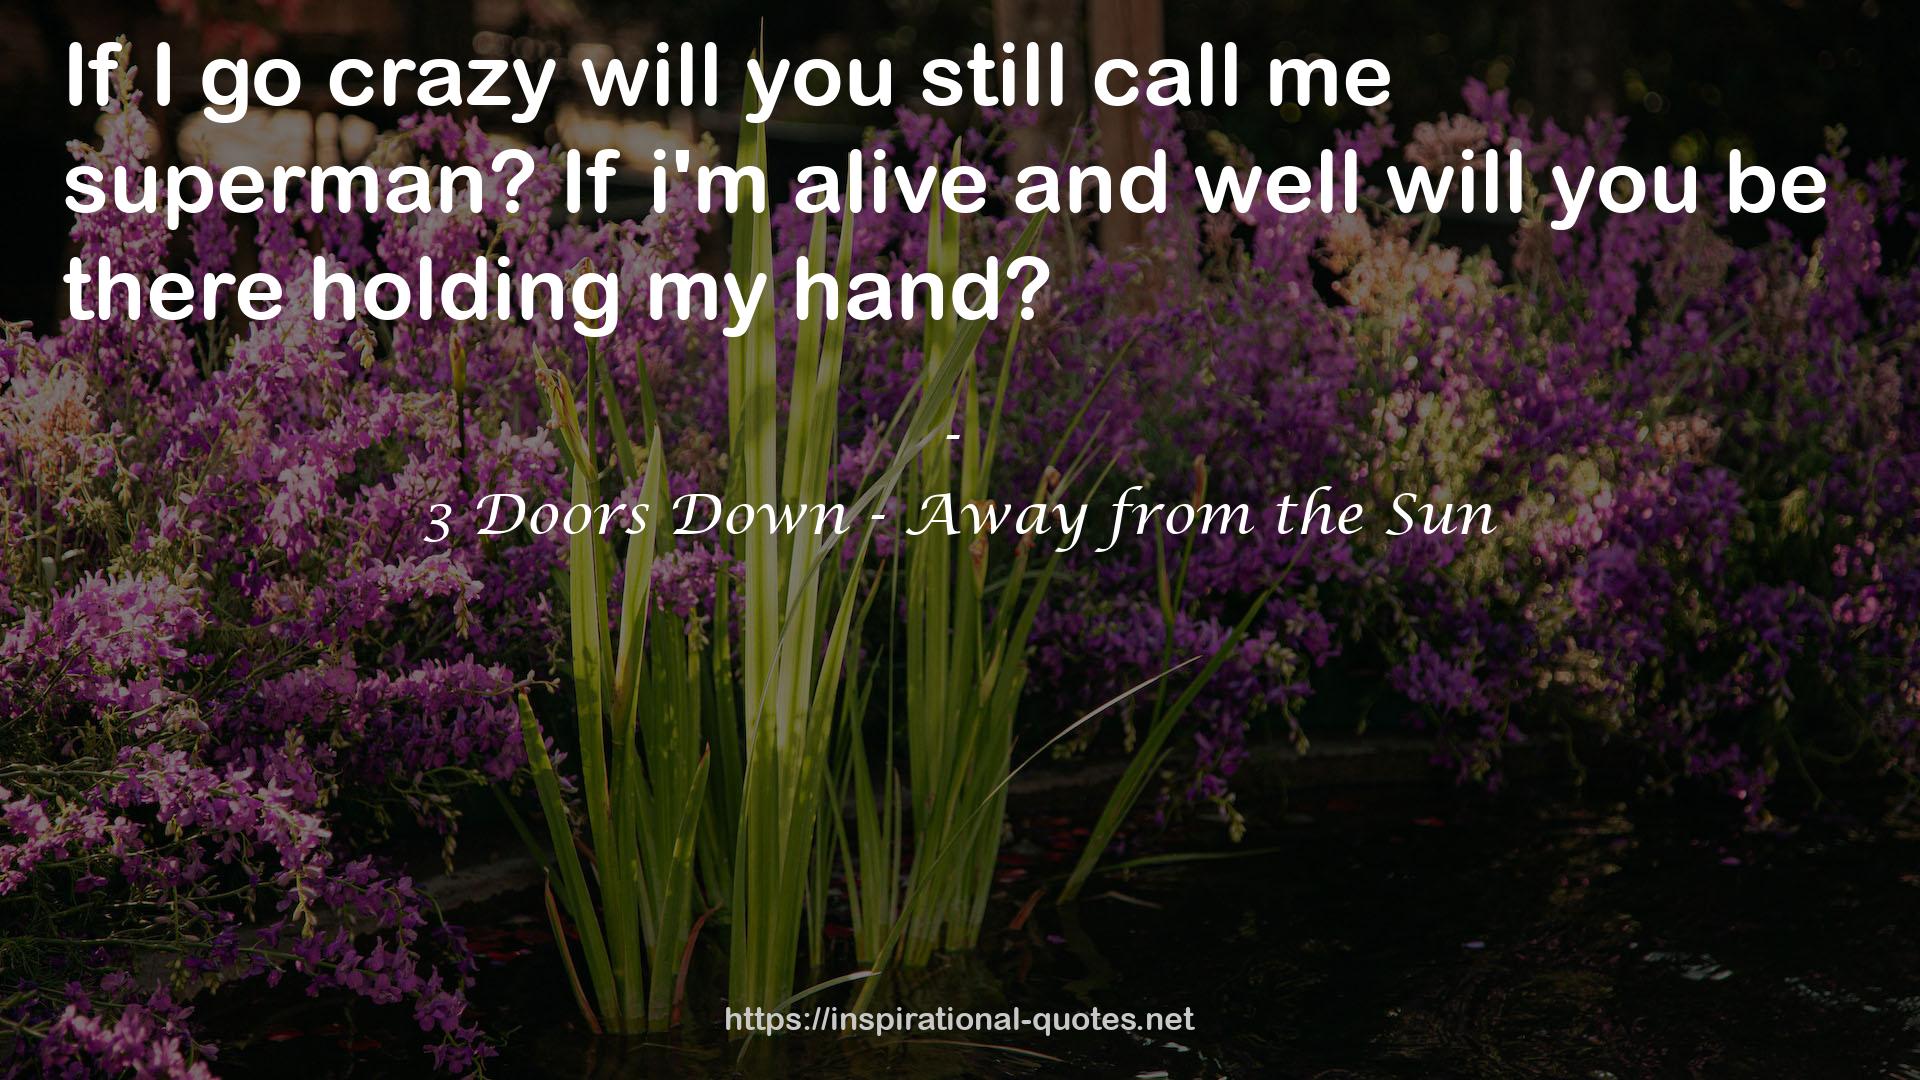 3 Doors Down - Away from the Sun QUOTES